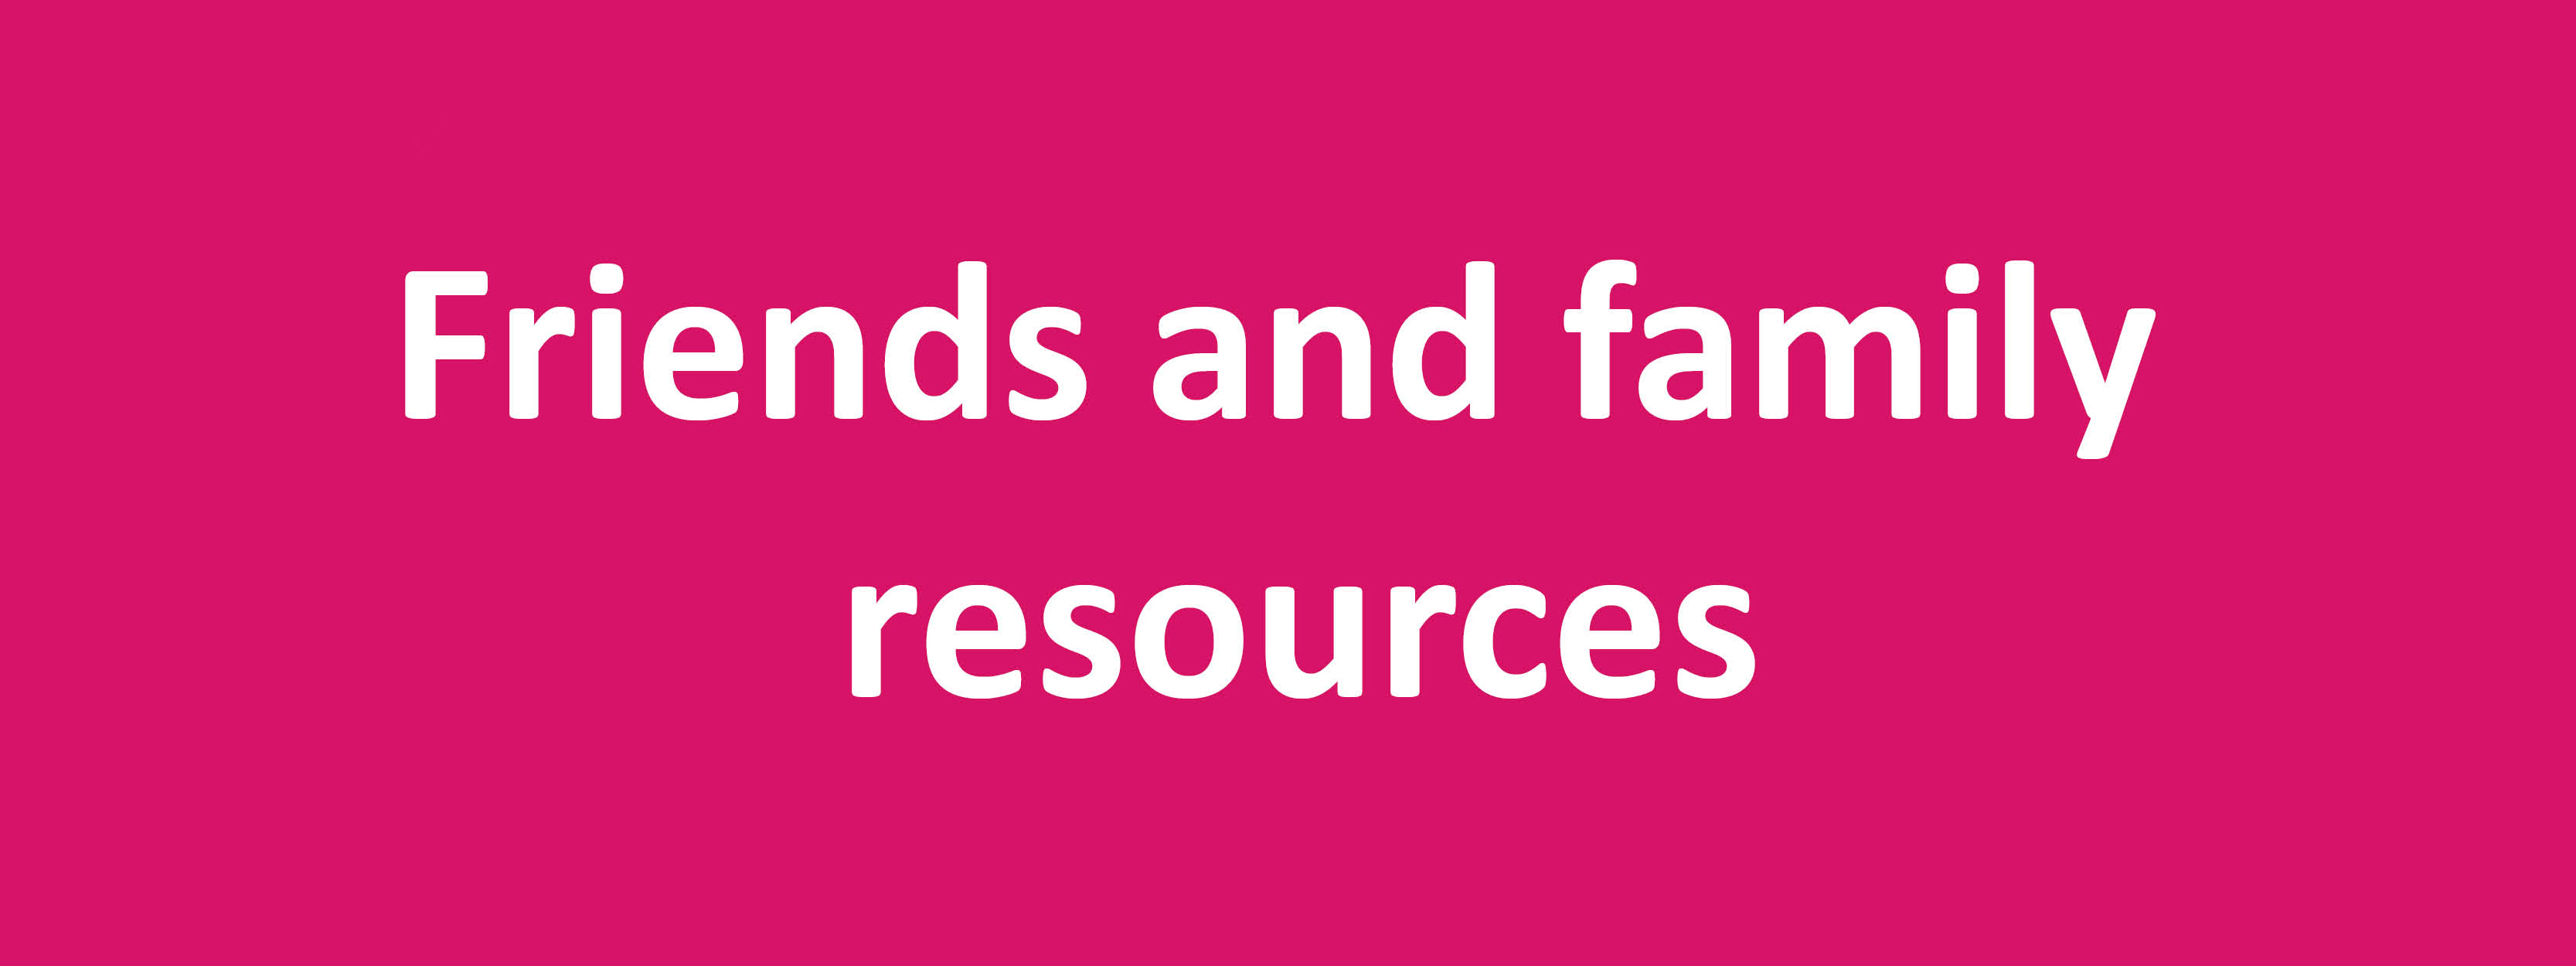 friends and family resources st margaret's hospice care